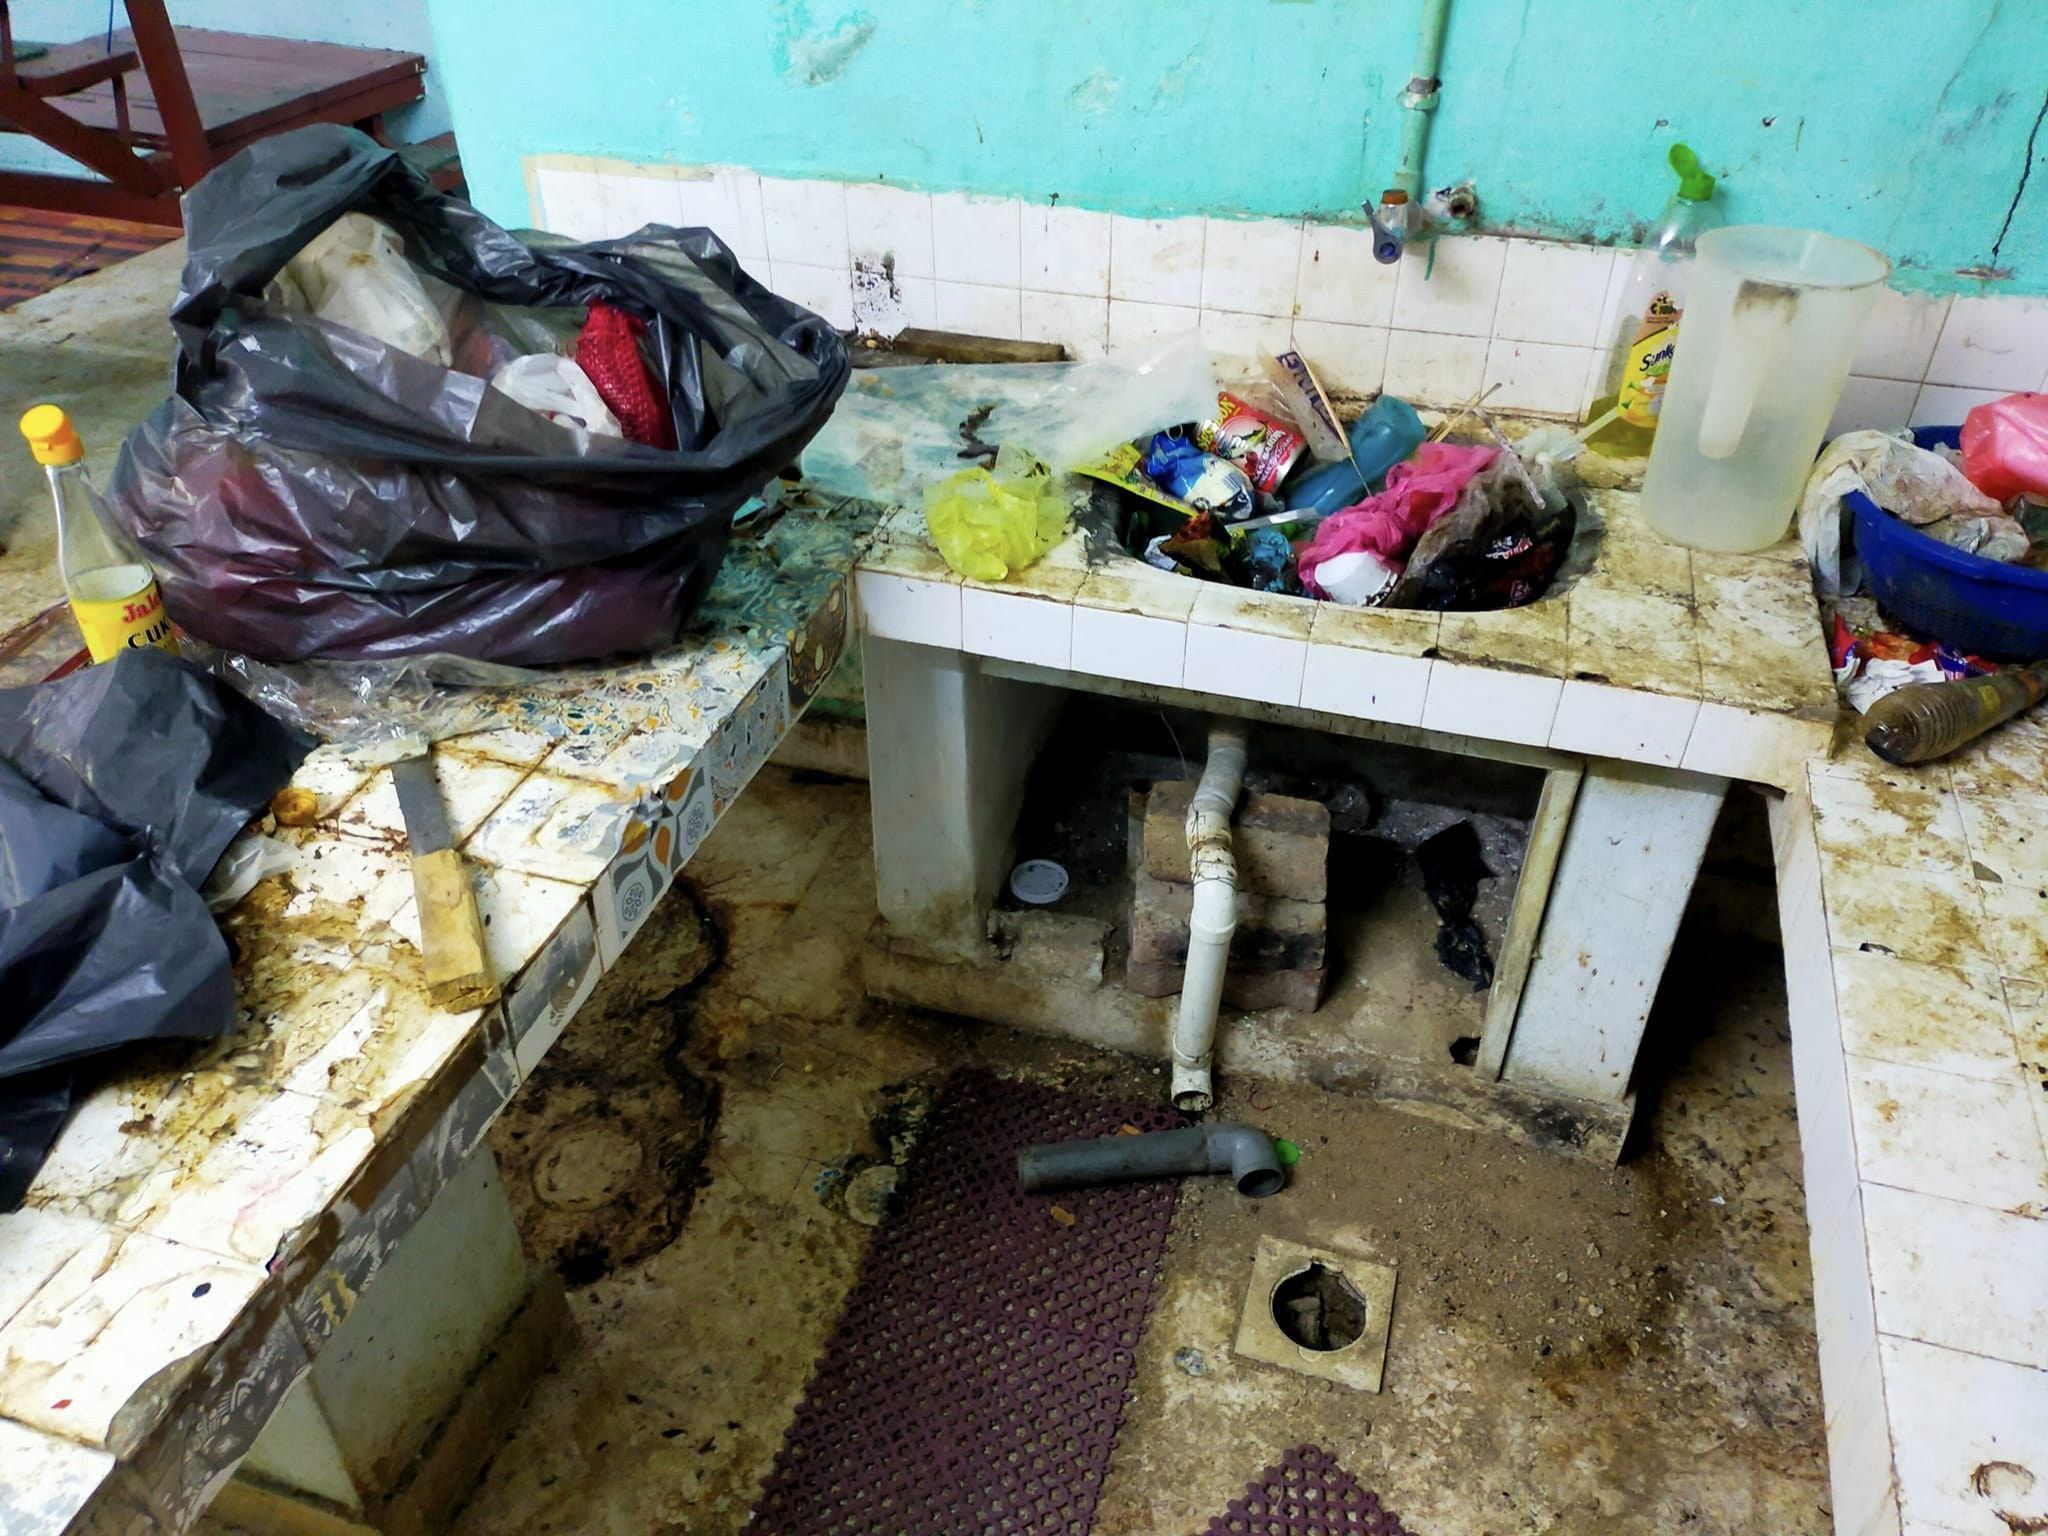 Dirty kitchen full of rubbish and rat carcasses